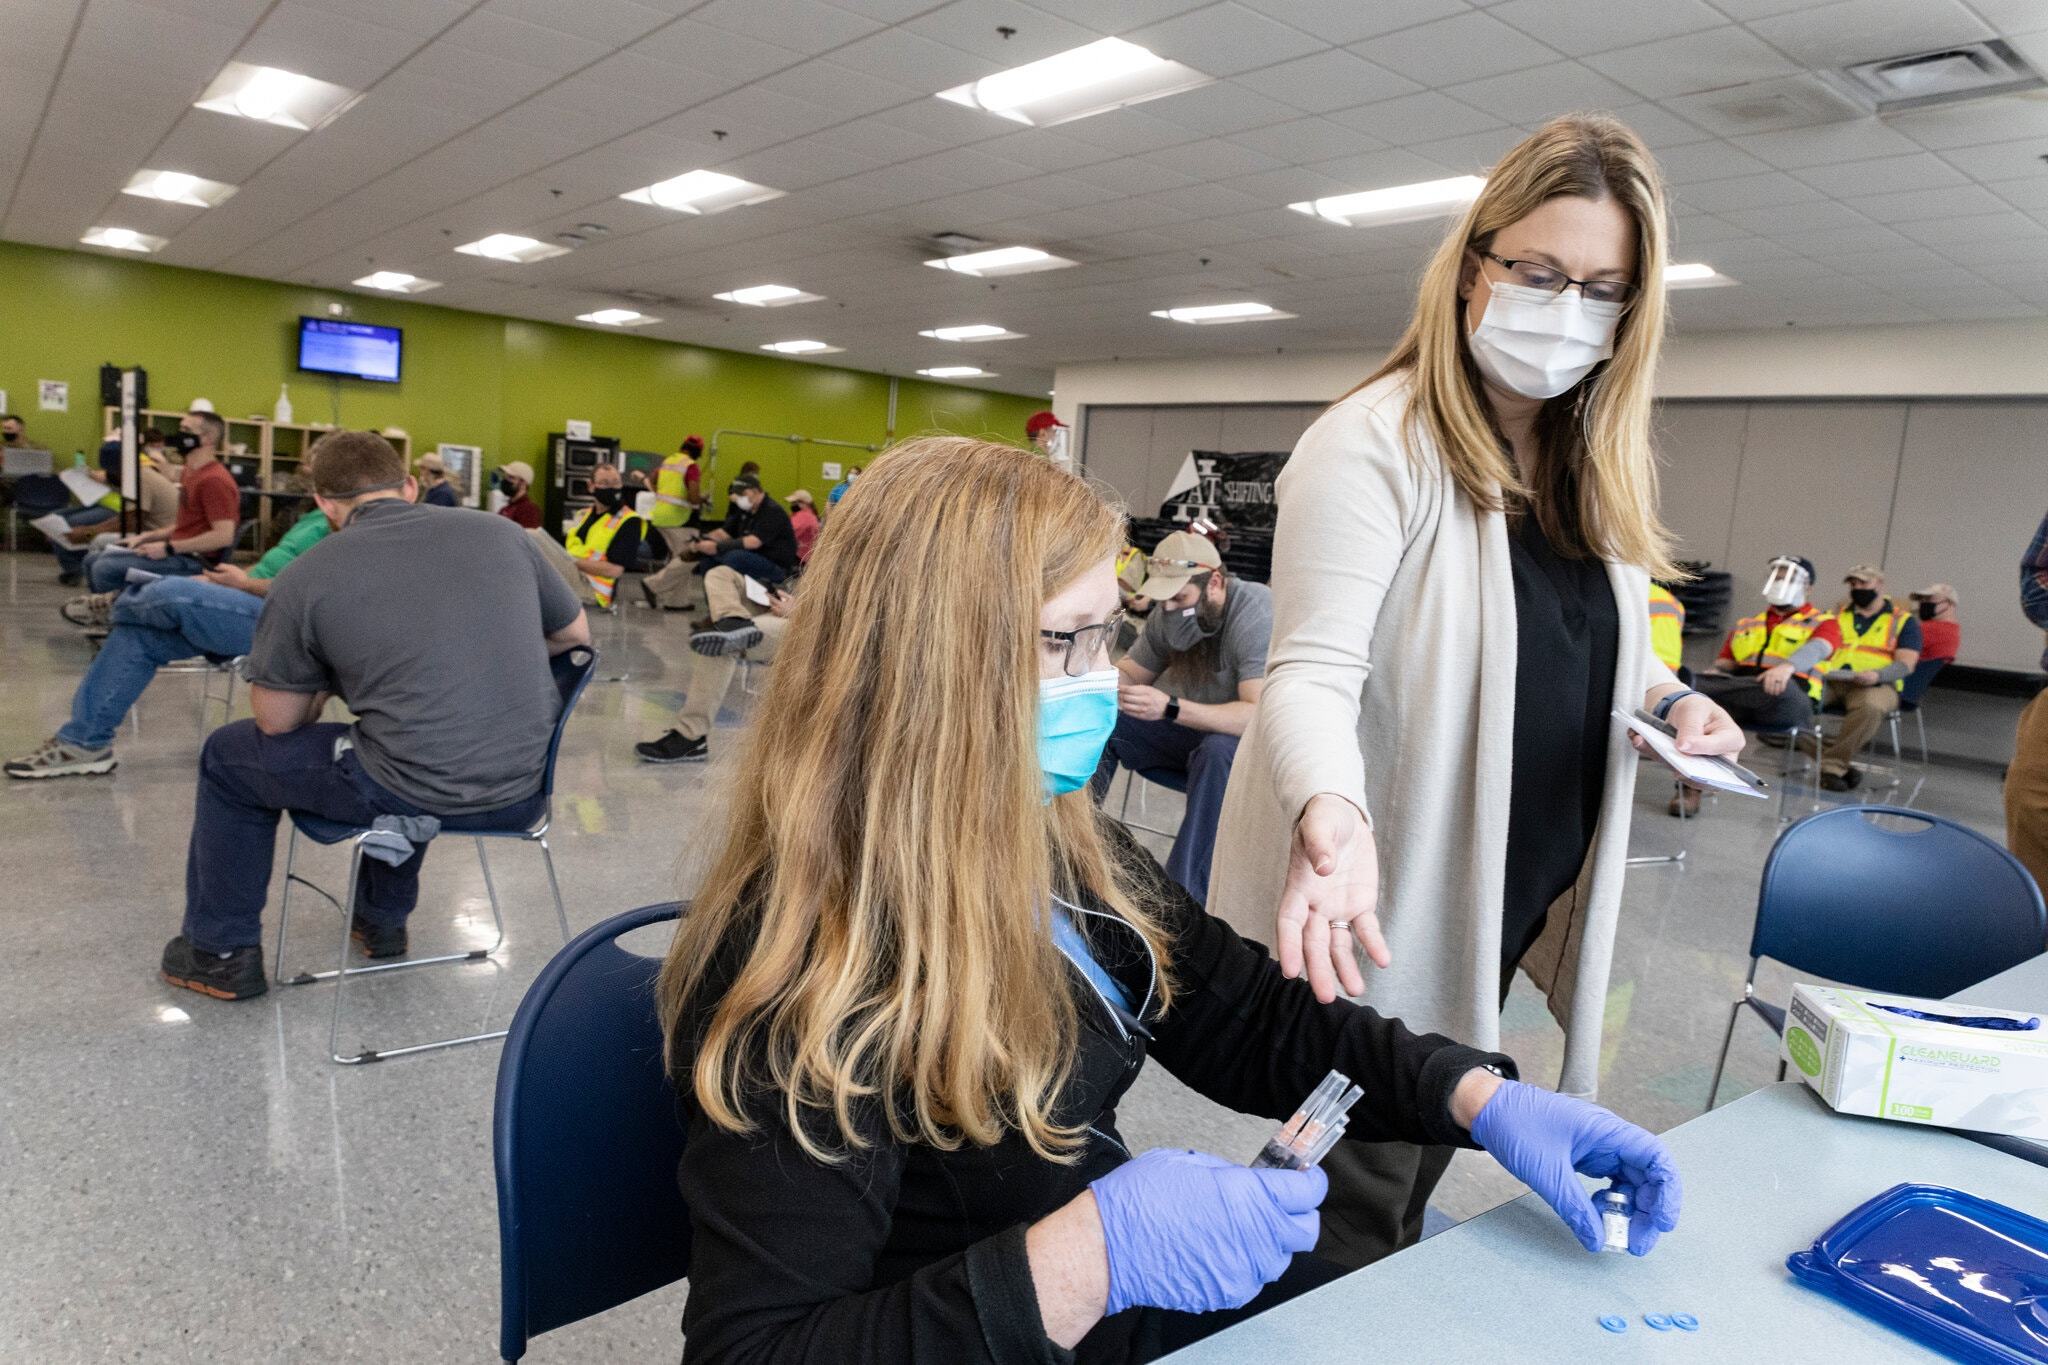 Health care workers prepared doses of a Covid-19 vaccine in Buffalo, W.Va., last month. Gov. Jim Justice announced a plan to give savings bonds to young people who get vaccinated.Credit...